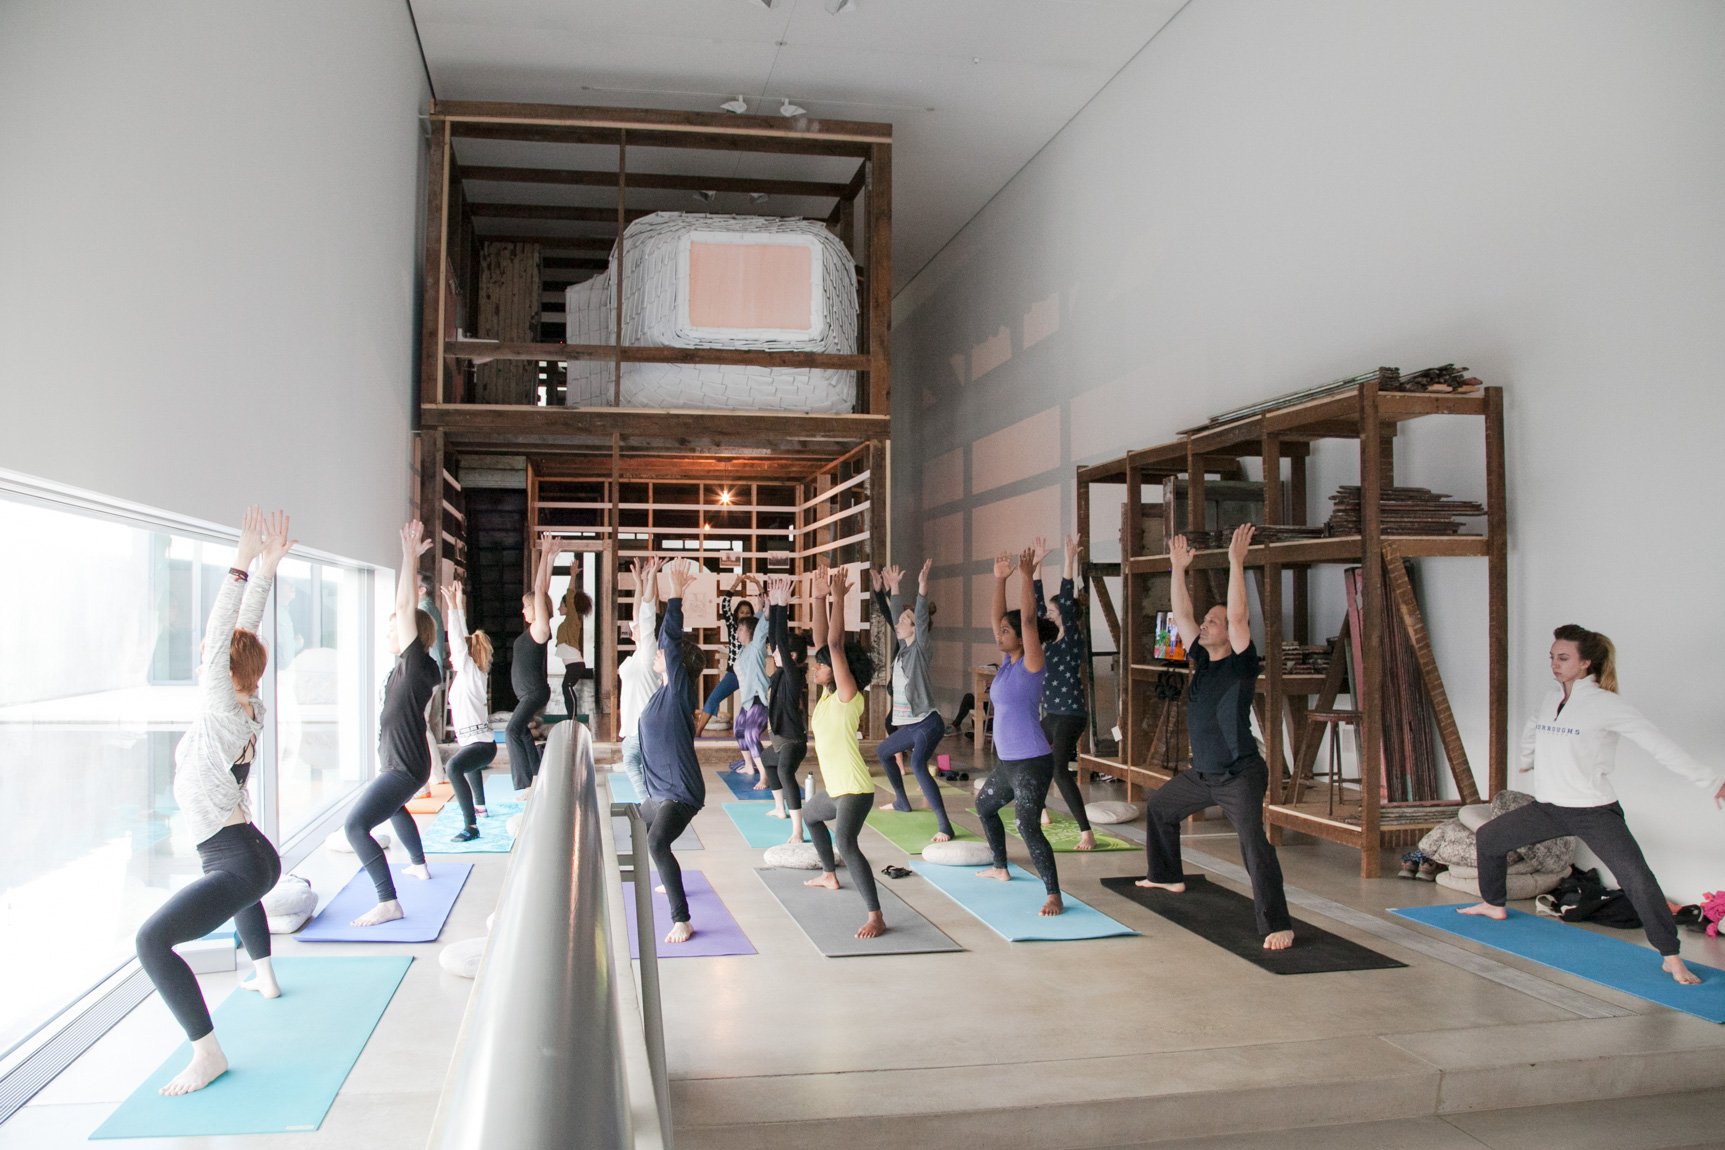 Attendants stand on yoga mats facing the windows adjoining the Water Court in the Main Gallery, their legs out and bent and arms straight up.